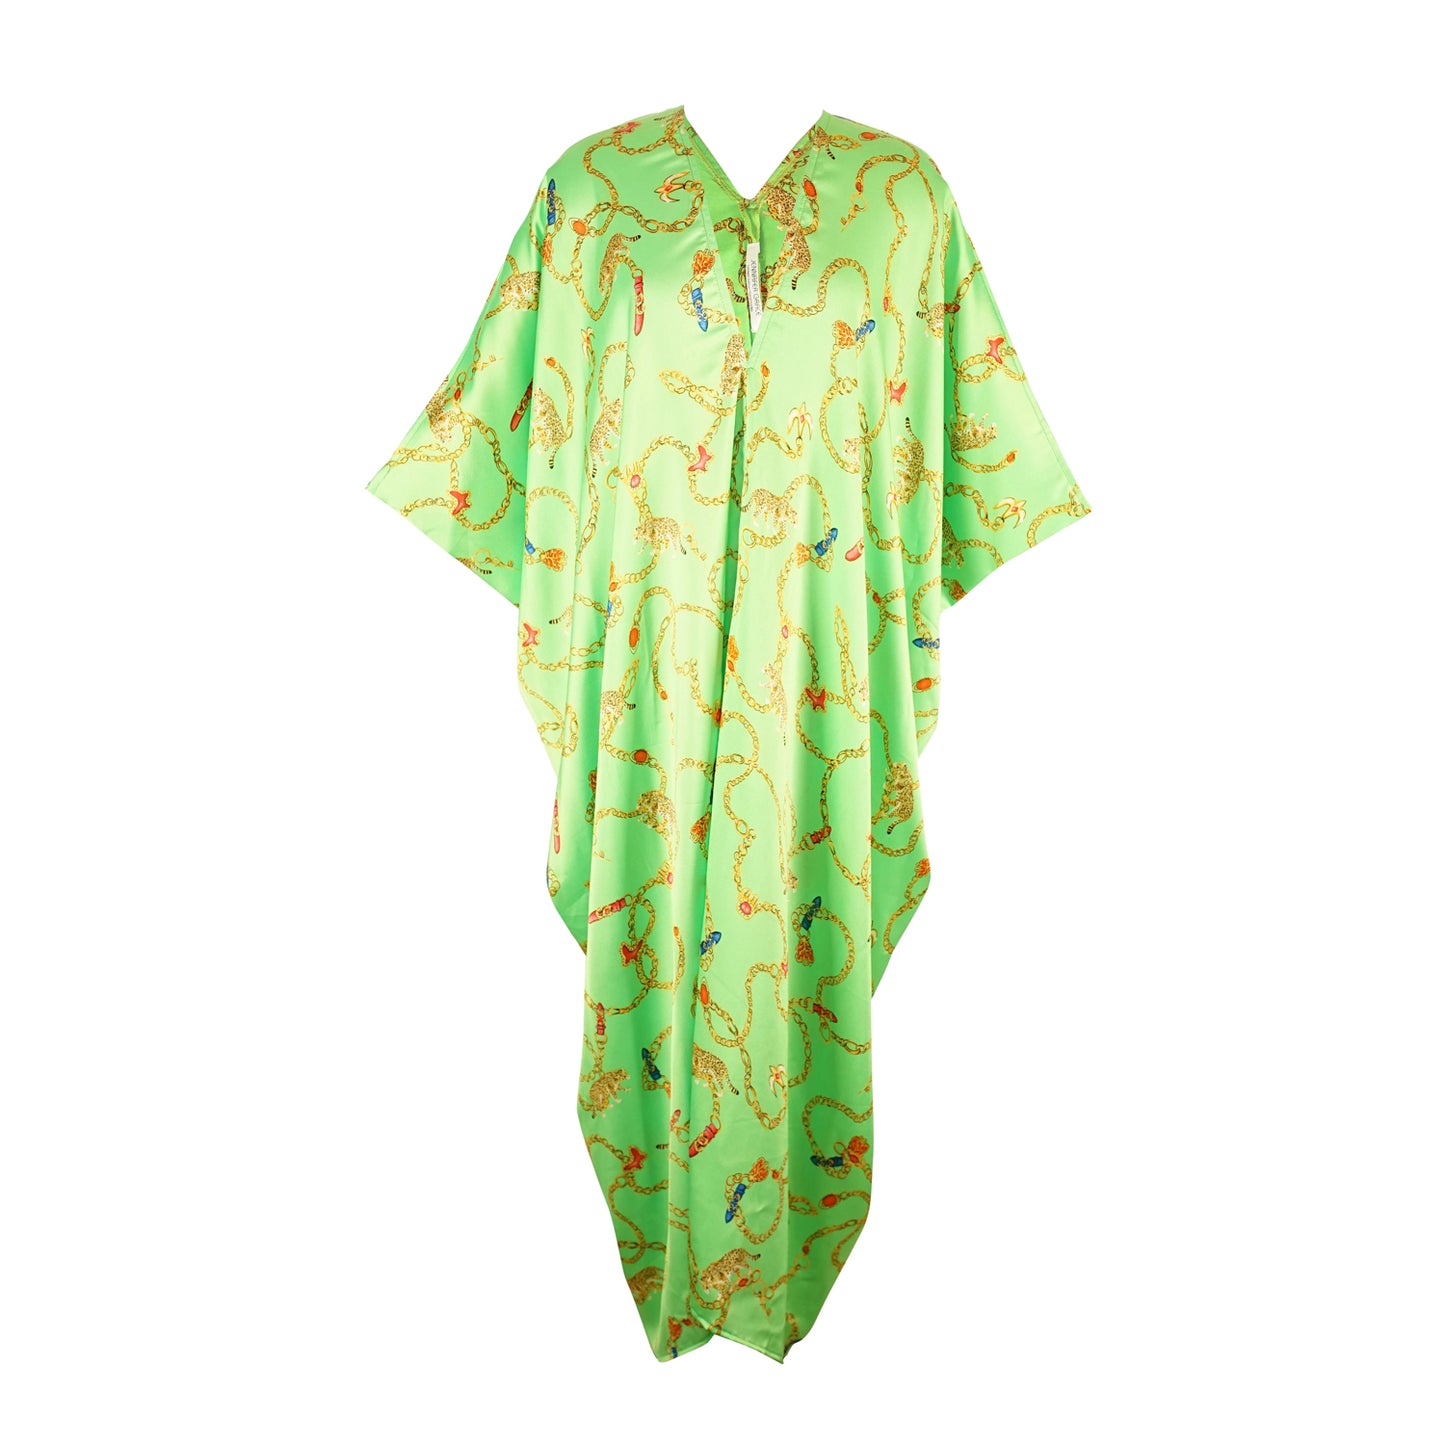 Neon lime green caftan dress with yellow gold chain and charm print. The caftan features a deep v-neckline, half-length batwing sleeves, and full length hem.